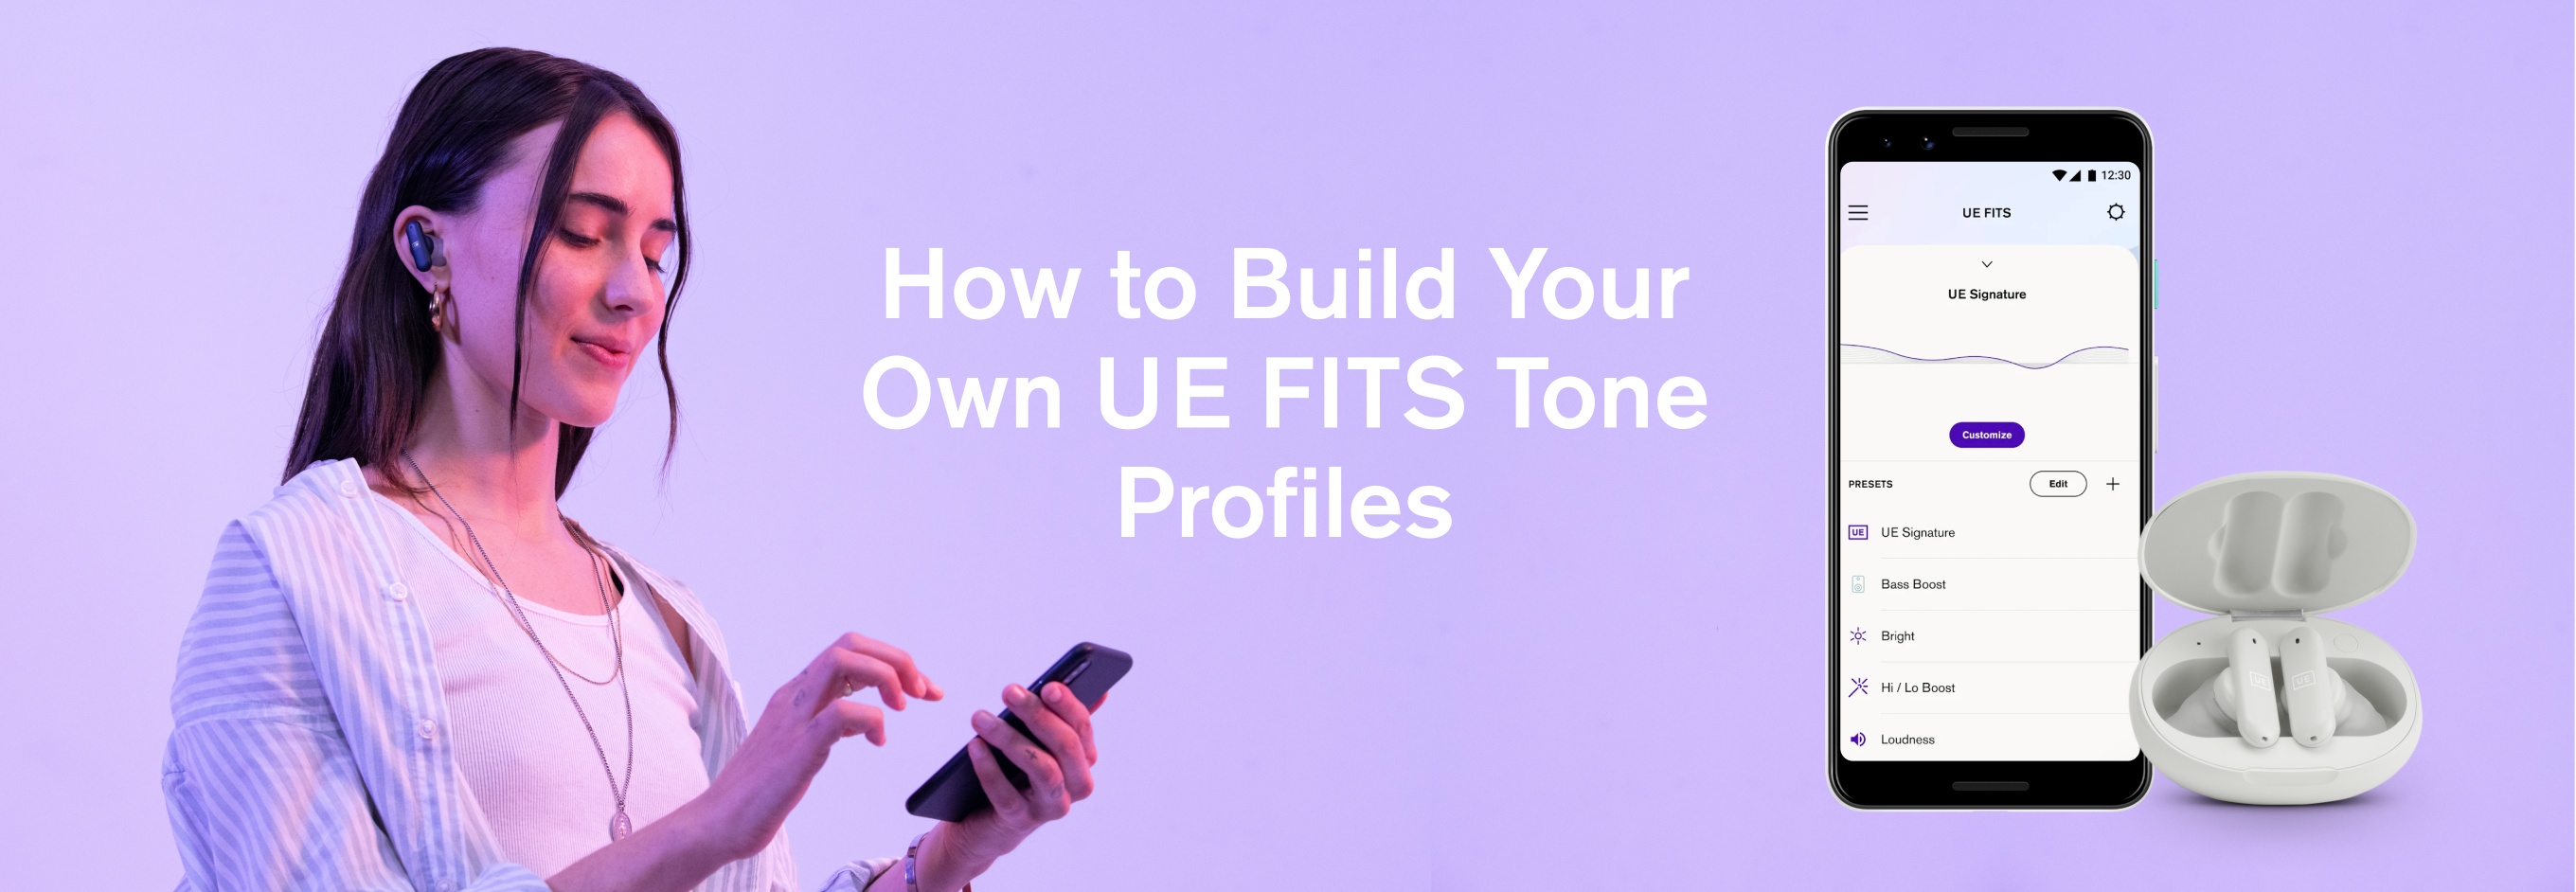 How to Build Your Own UE FITS Tone Profiles